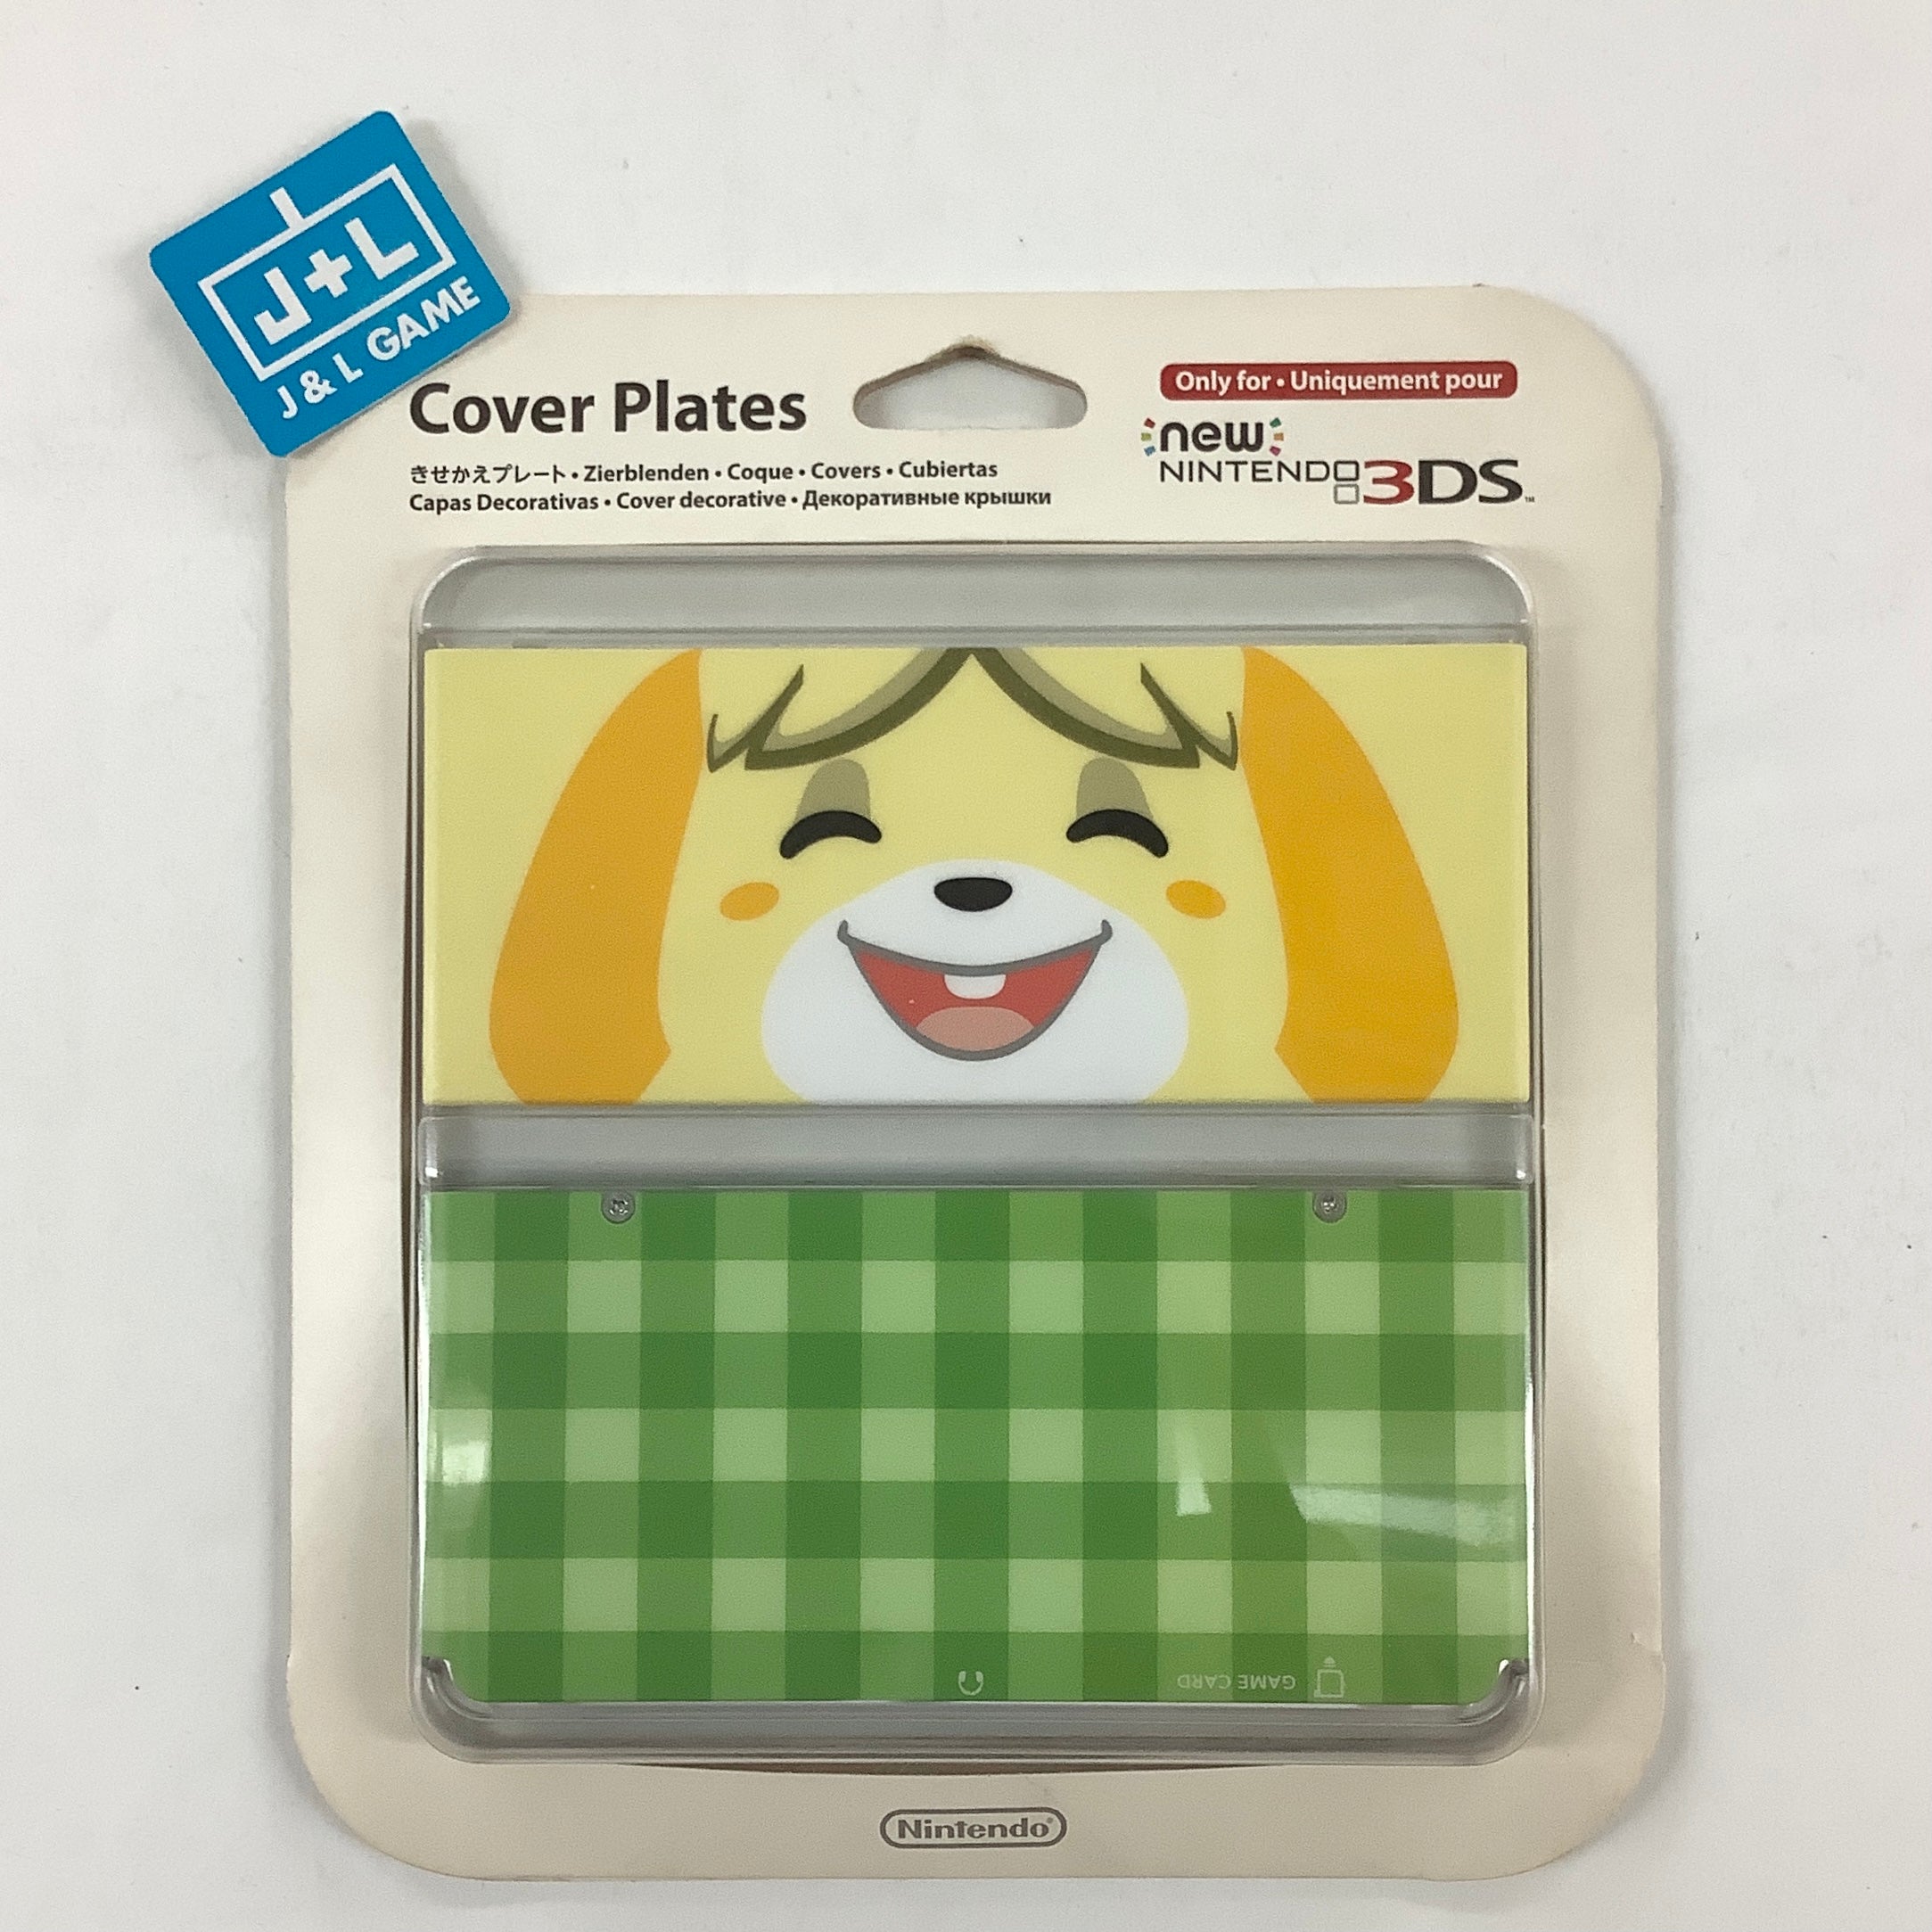 New Nintendo 3DS Cover Plates No.013 (Animal Crossing Isabelle) - New Nintendo 3DS (Japanese Import) Accessories Nintendo   